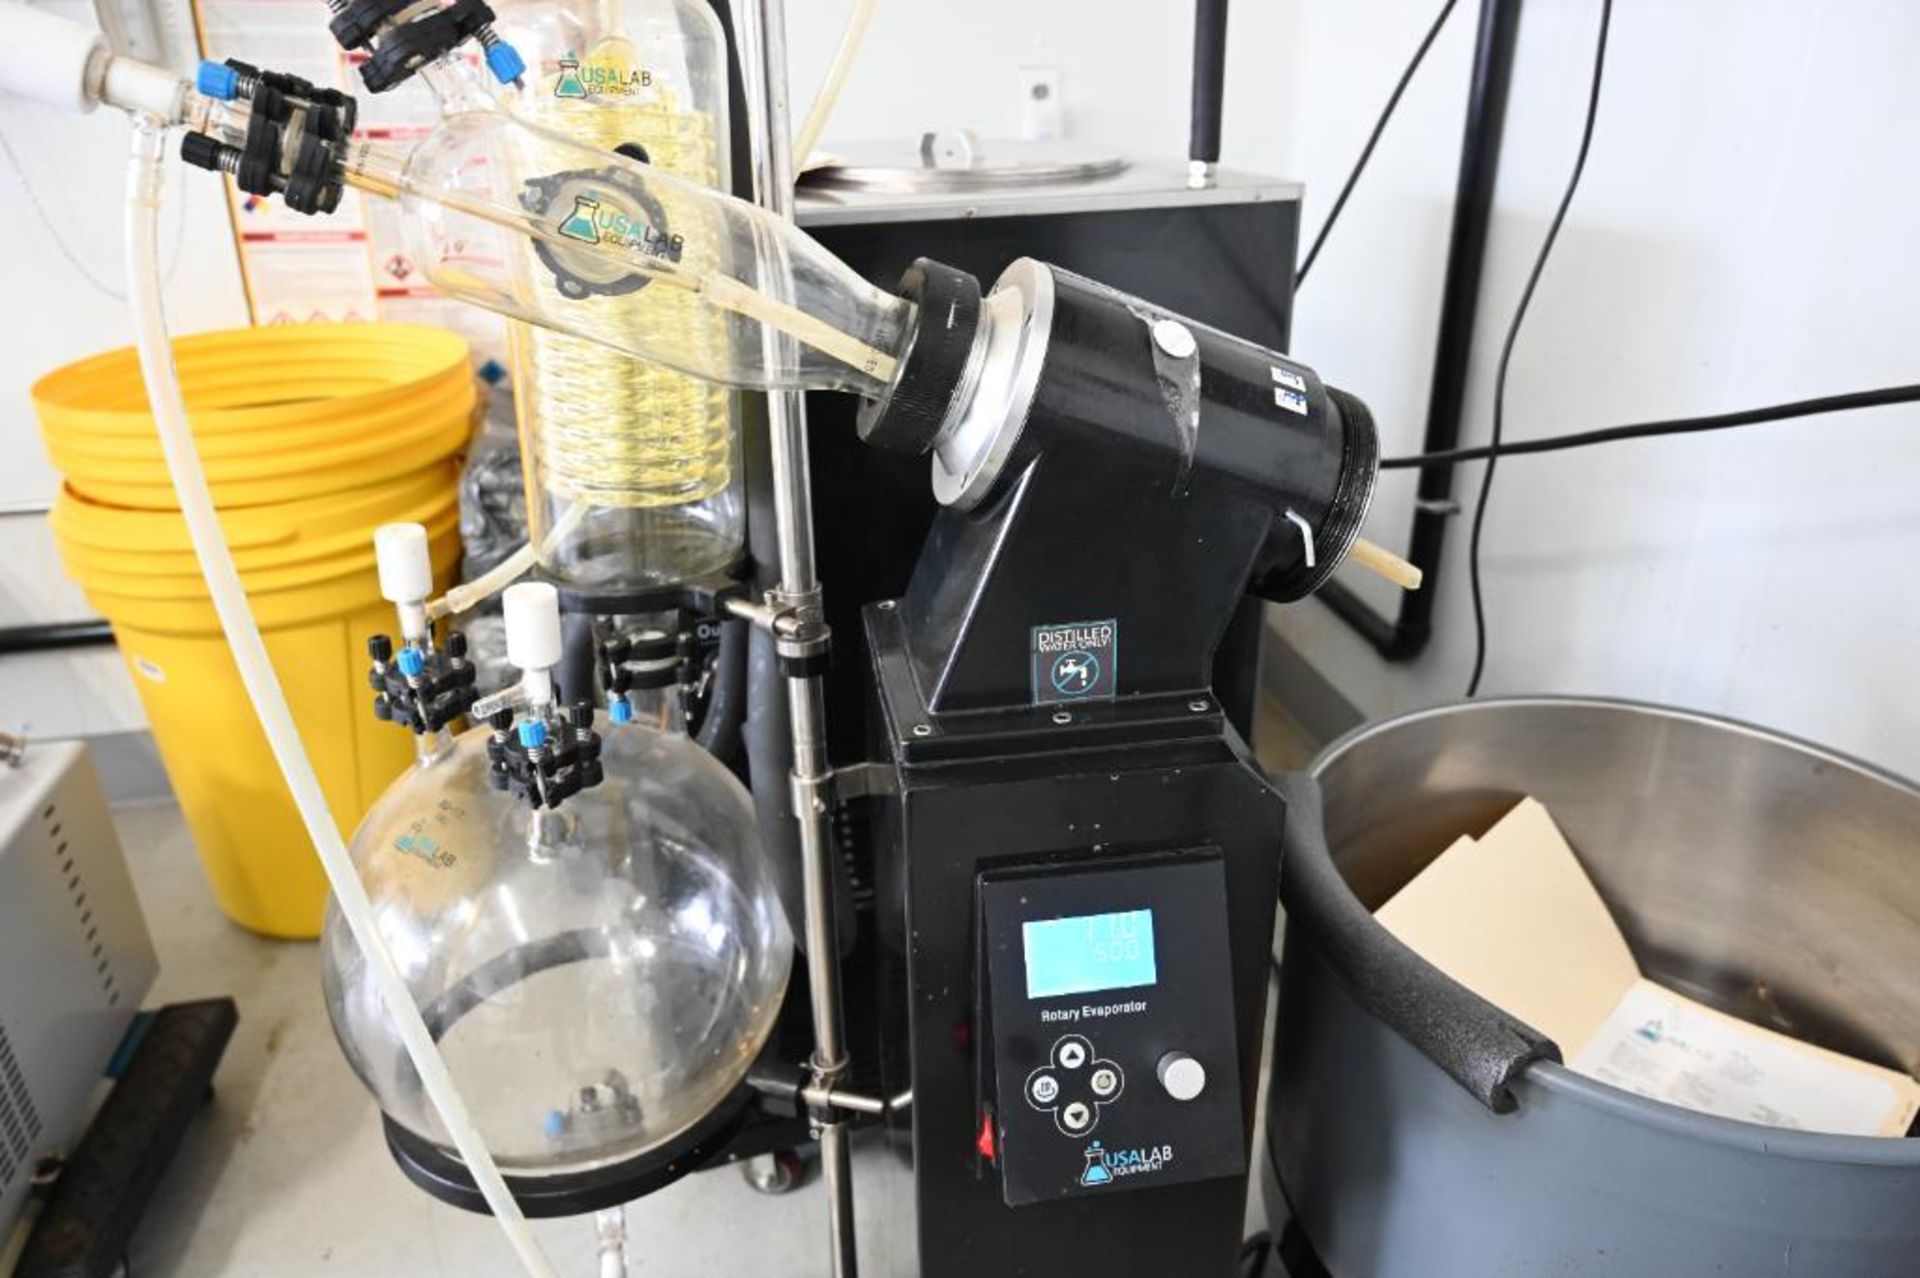 Turn Key 50 Liter USA Lab Rotary Evaporator with Chiller - Image 6 of 13